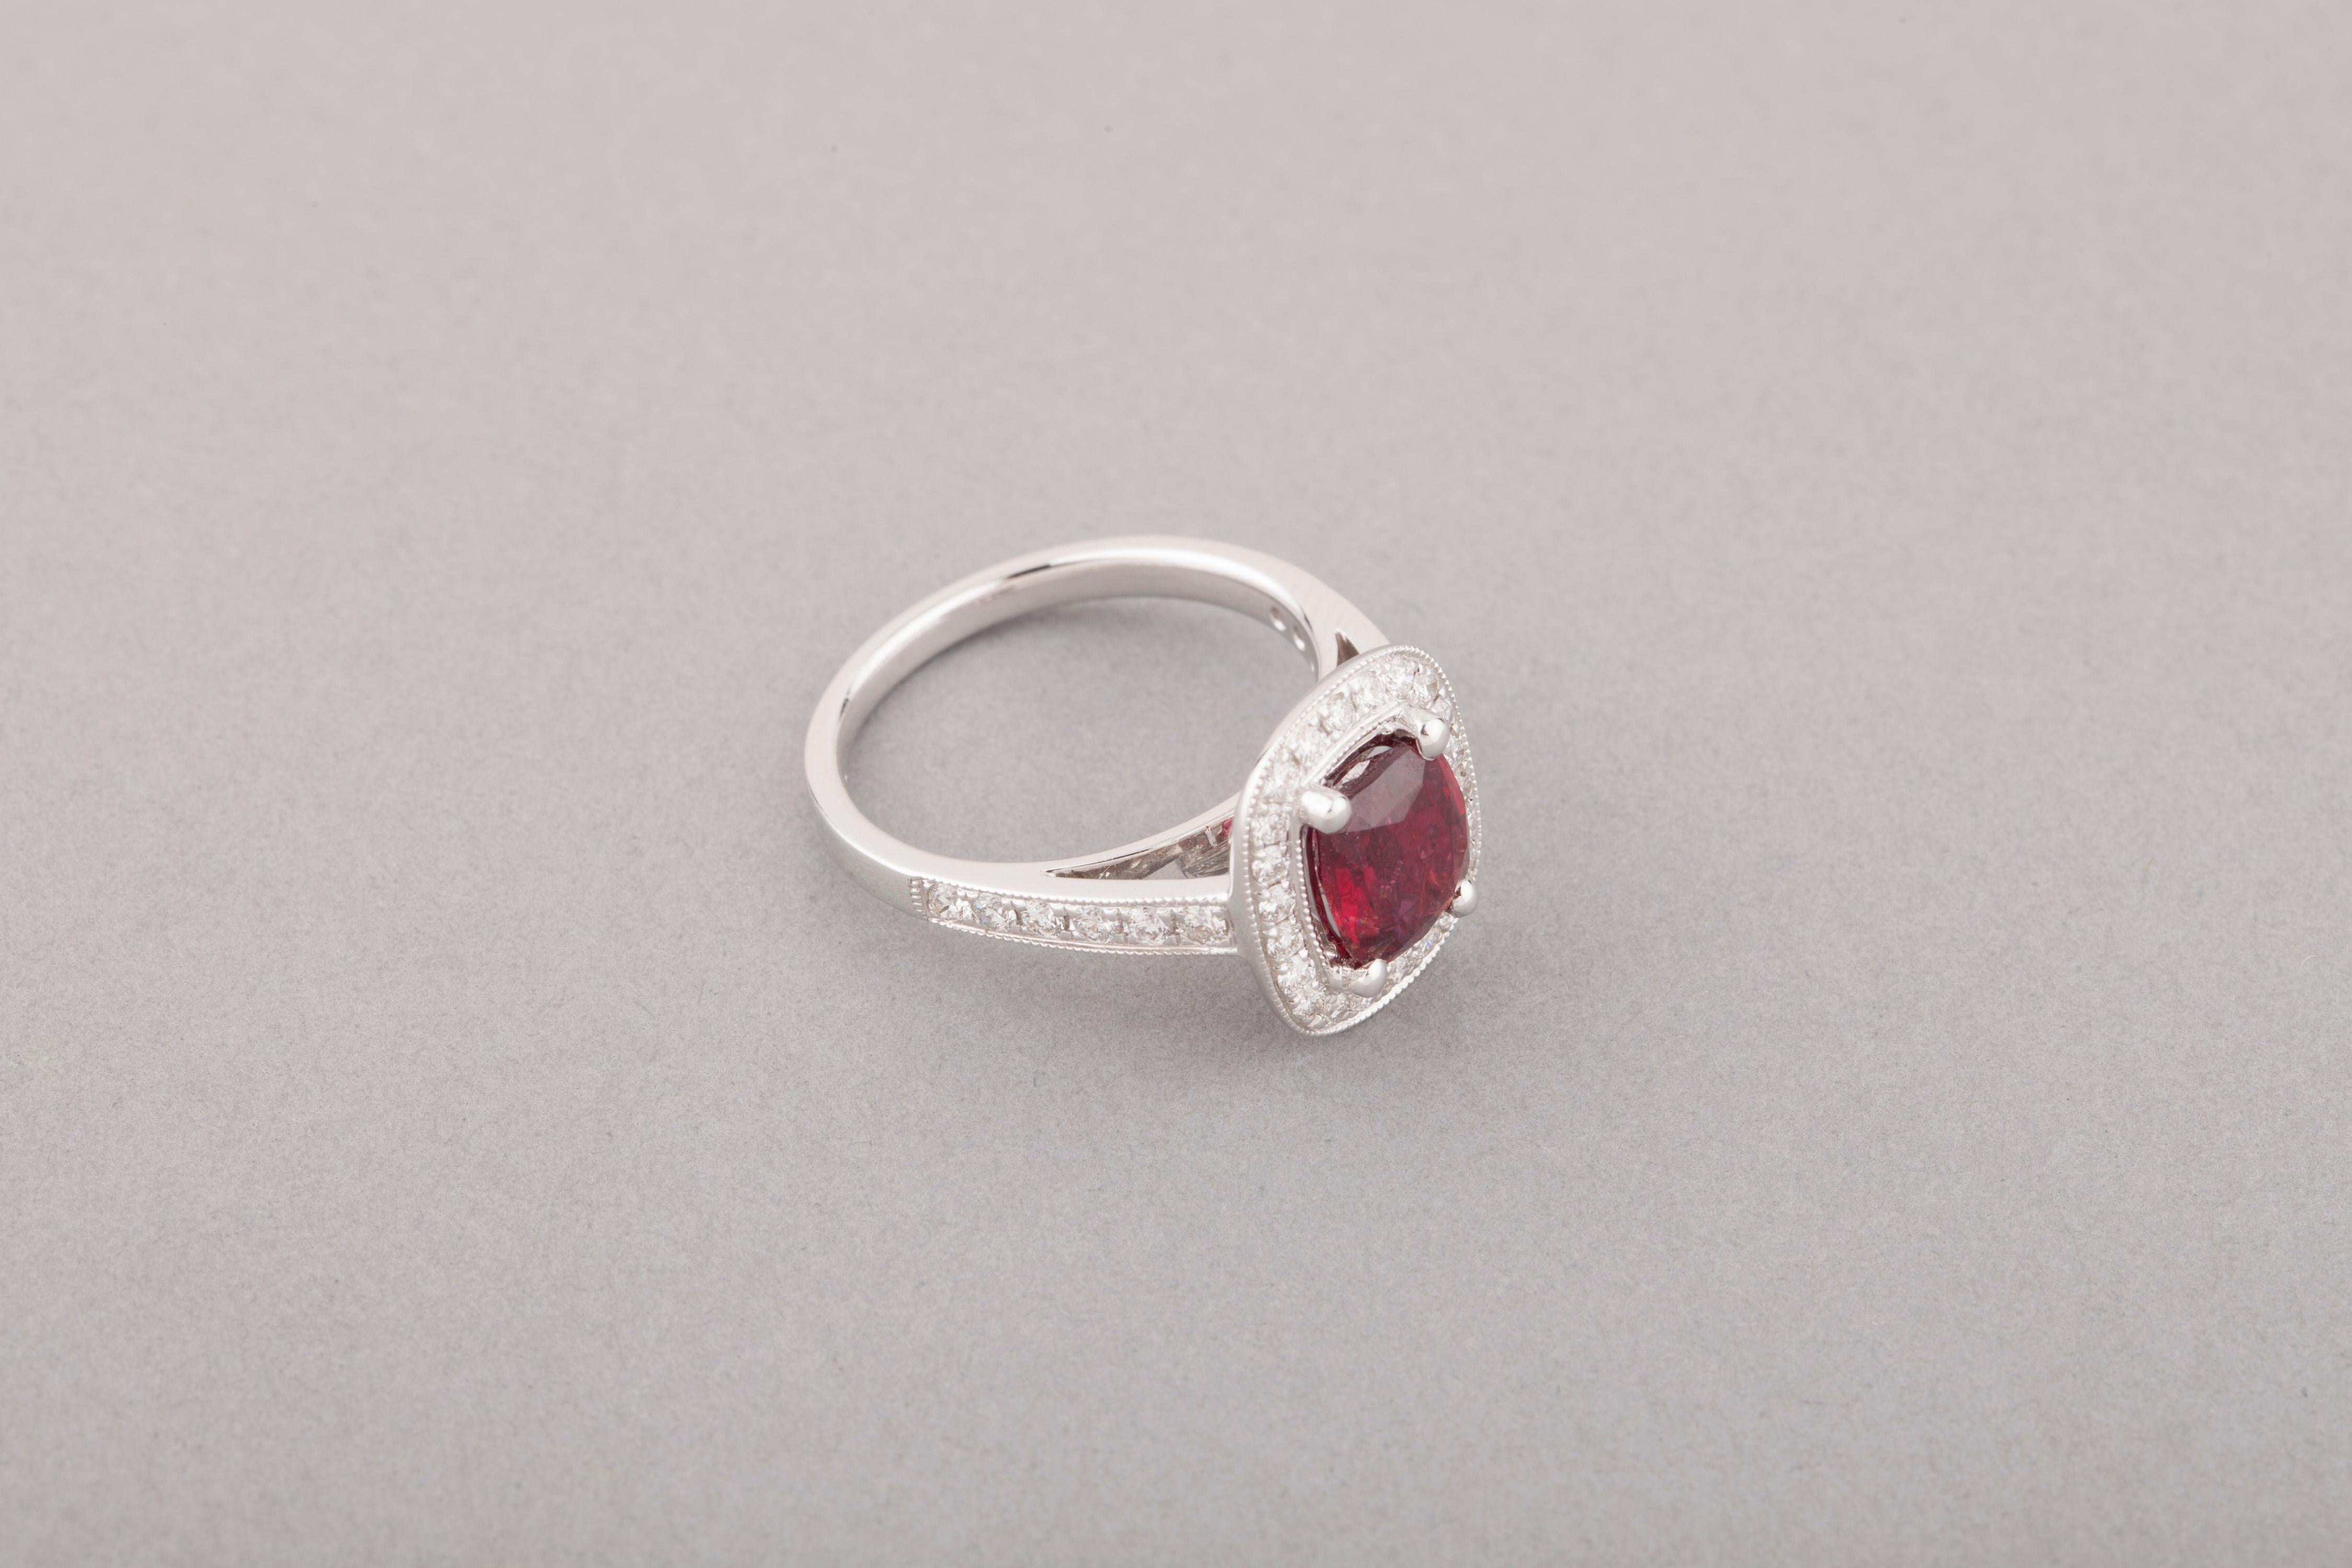 Certified 2.09 Carat Ruby and Diamonds Ring For Sale 1